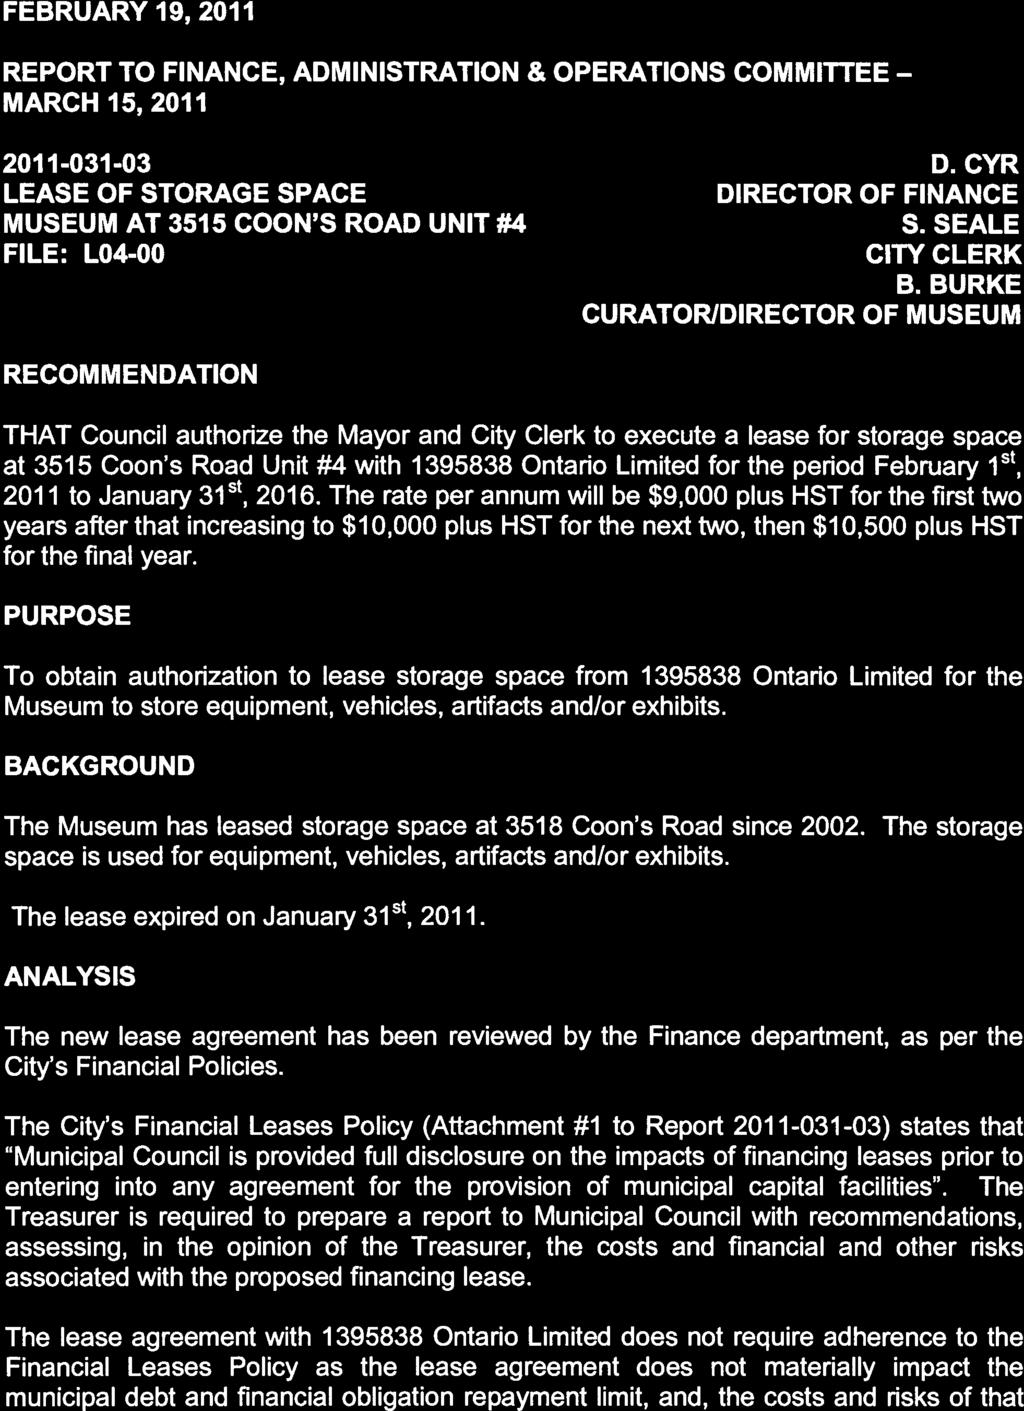 FEBRUARY 19, 2011 REPORT TO FINANCE, ADMINISTRATION & OPERATIONS COMMITTEE MARCH 15, 2011 2011-031-03 D.CYR LEASE OF STORAGE SPACE DIRECTOR OF FINANCE MUSEUM AT 3515 COON S ROAD UNIT #4 5.